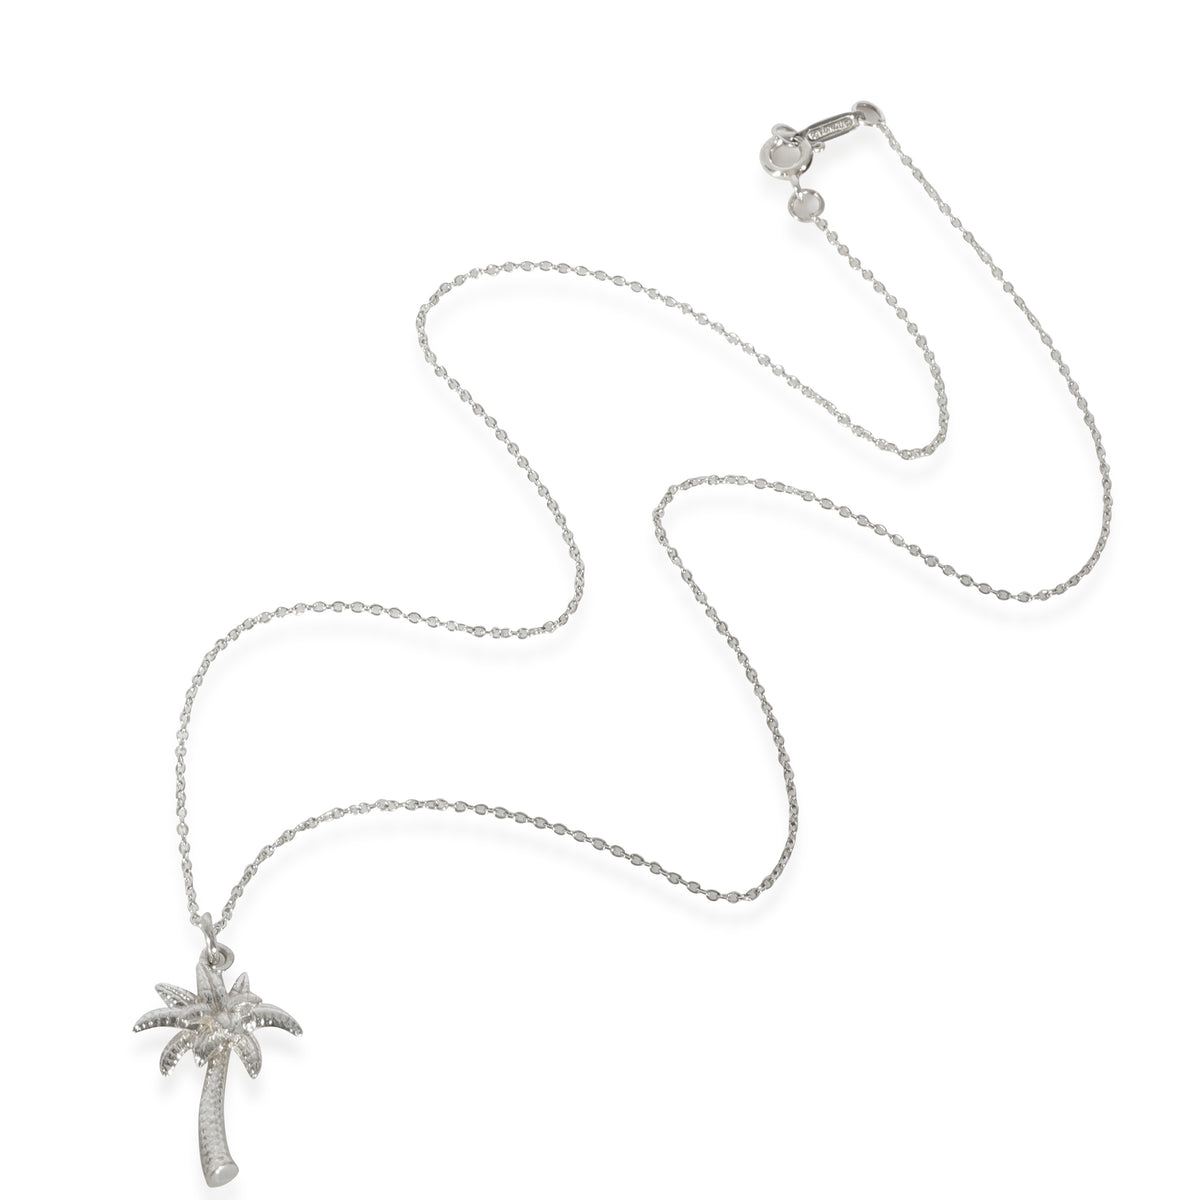 Tiffany & Co. Palm Tree Necklace in Sterling Silver